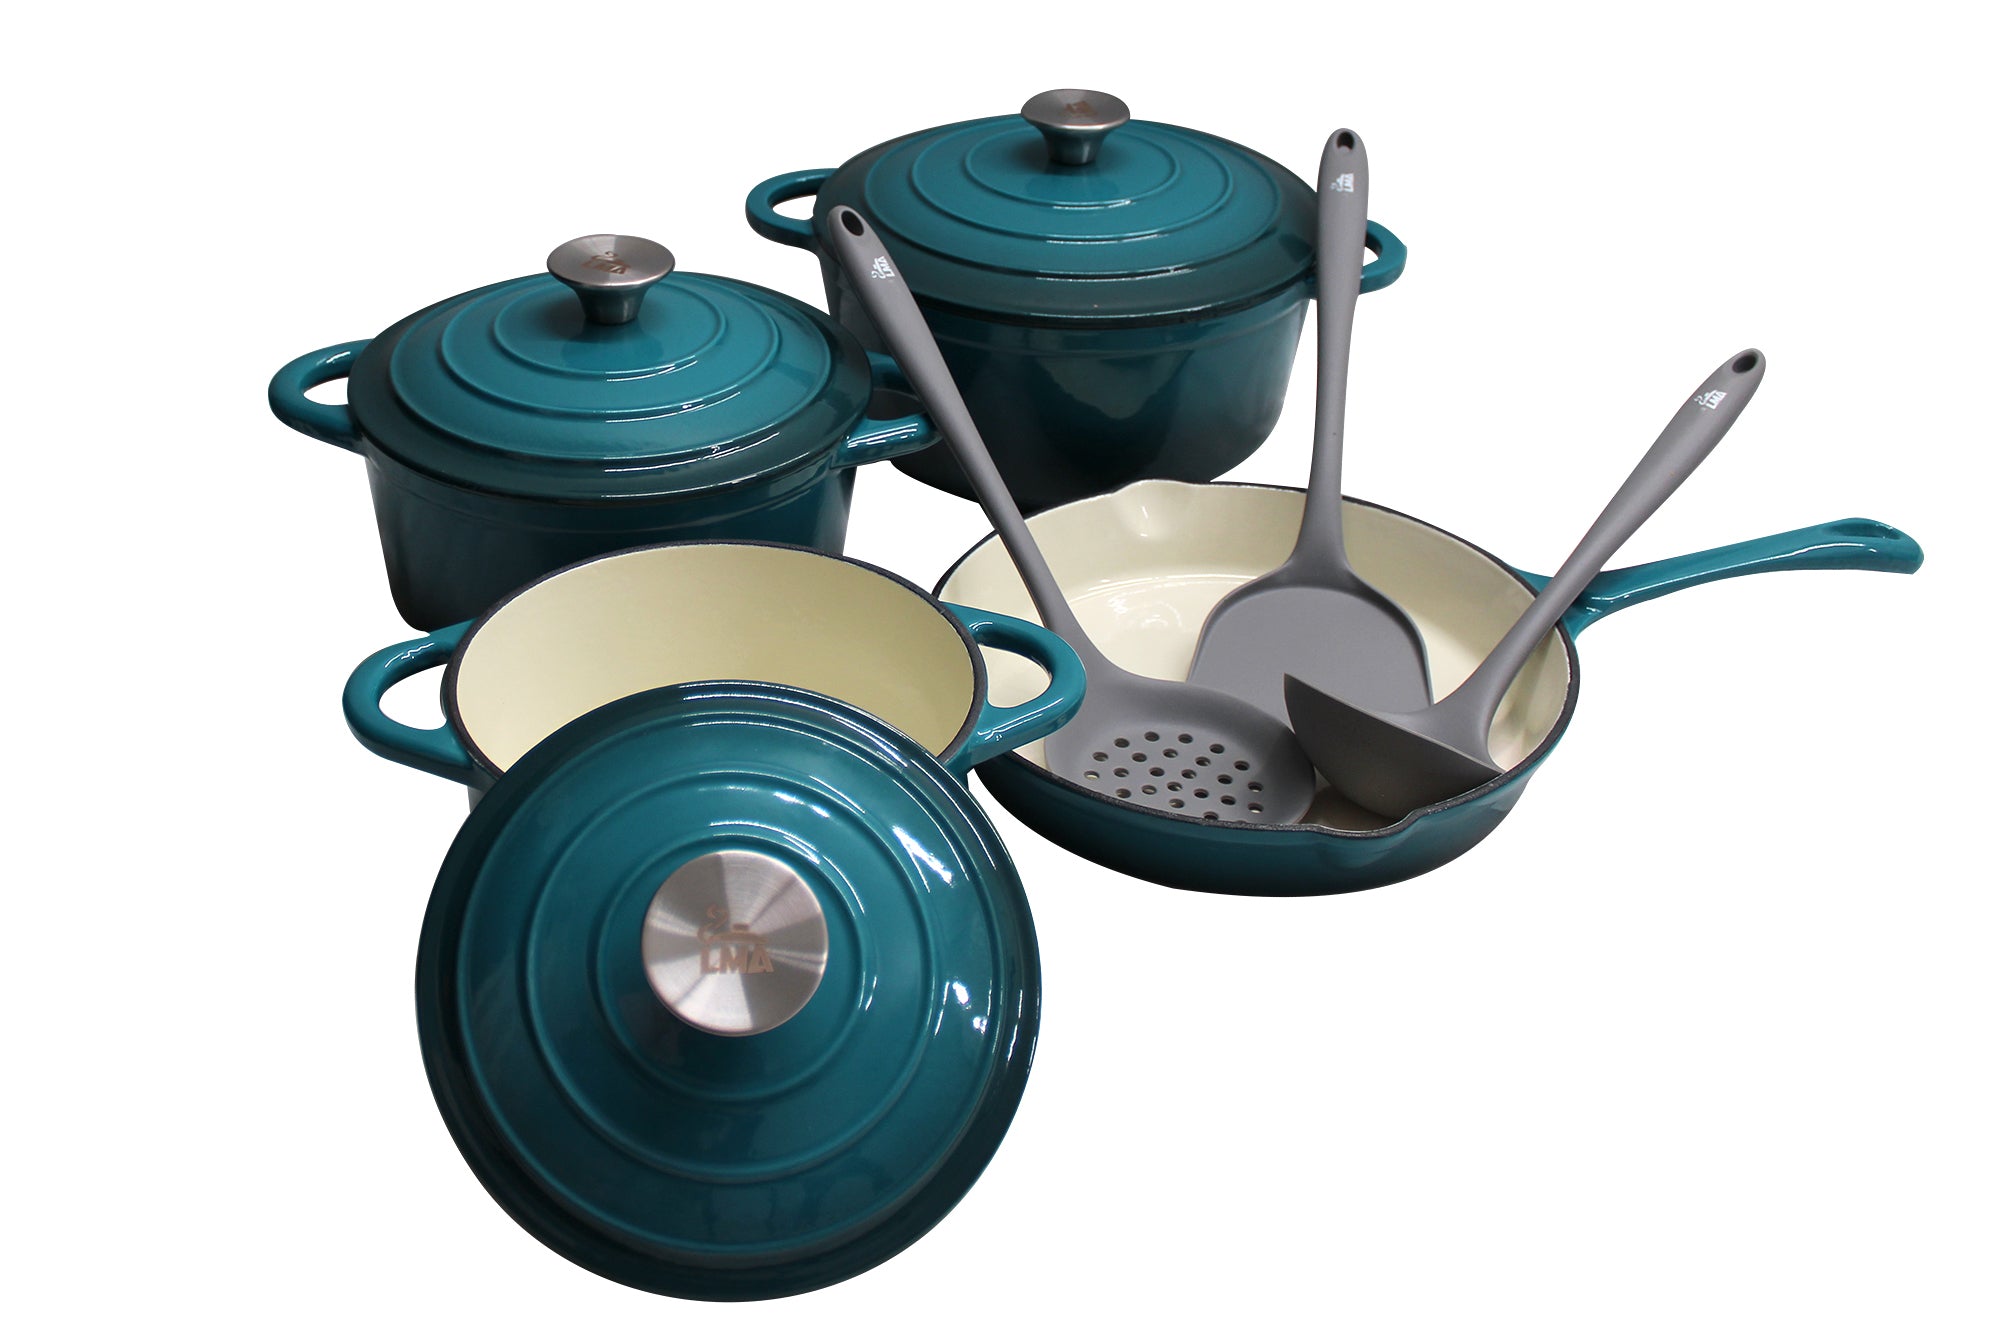 https://cdn.shopify.com/s/files/1/0552/3210/2444/products/turquoisecastironand3pieceutensilsset.jpg?v=1673339733&width=2000